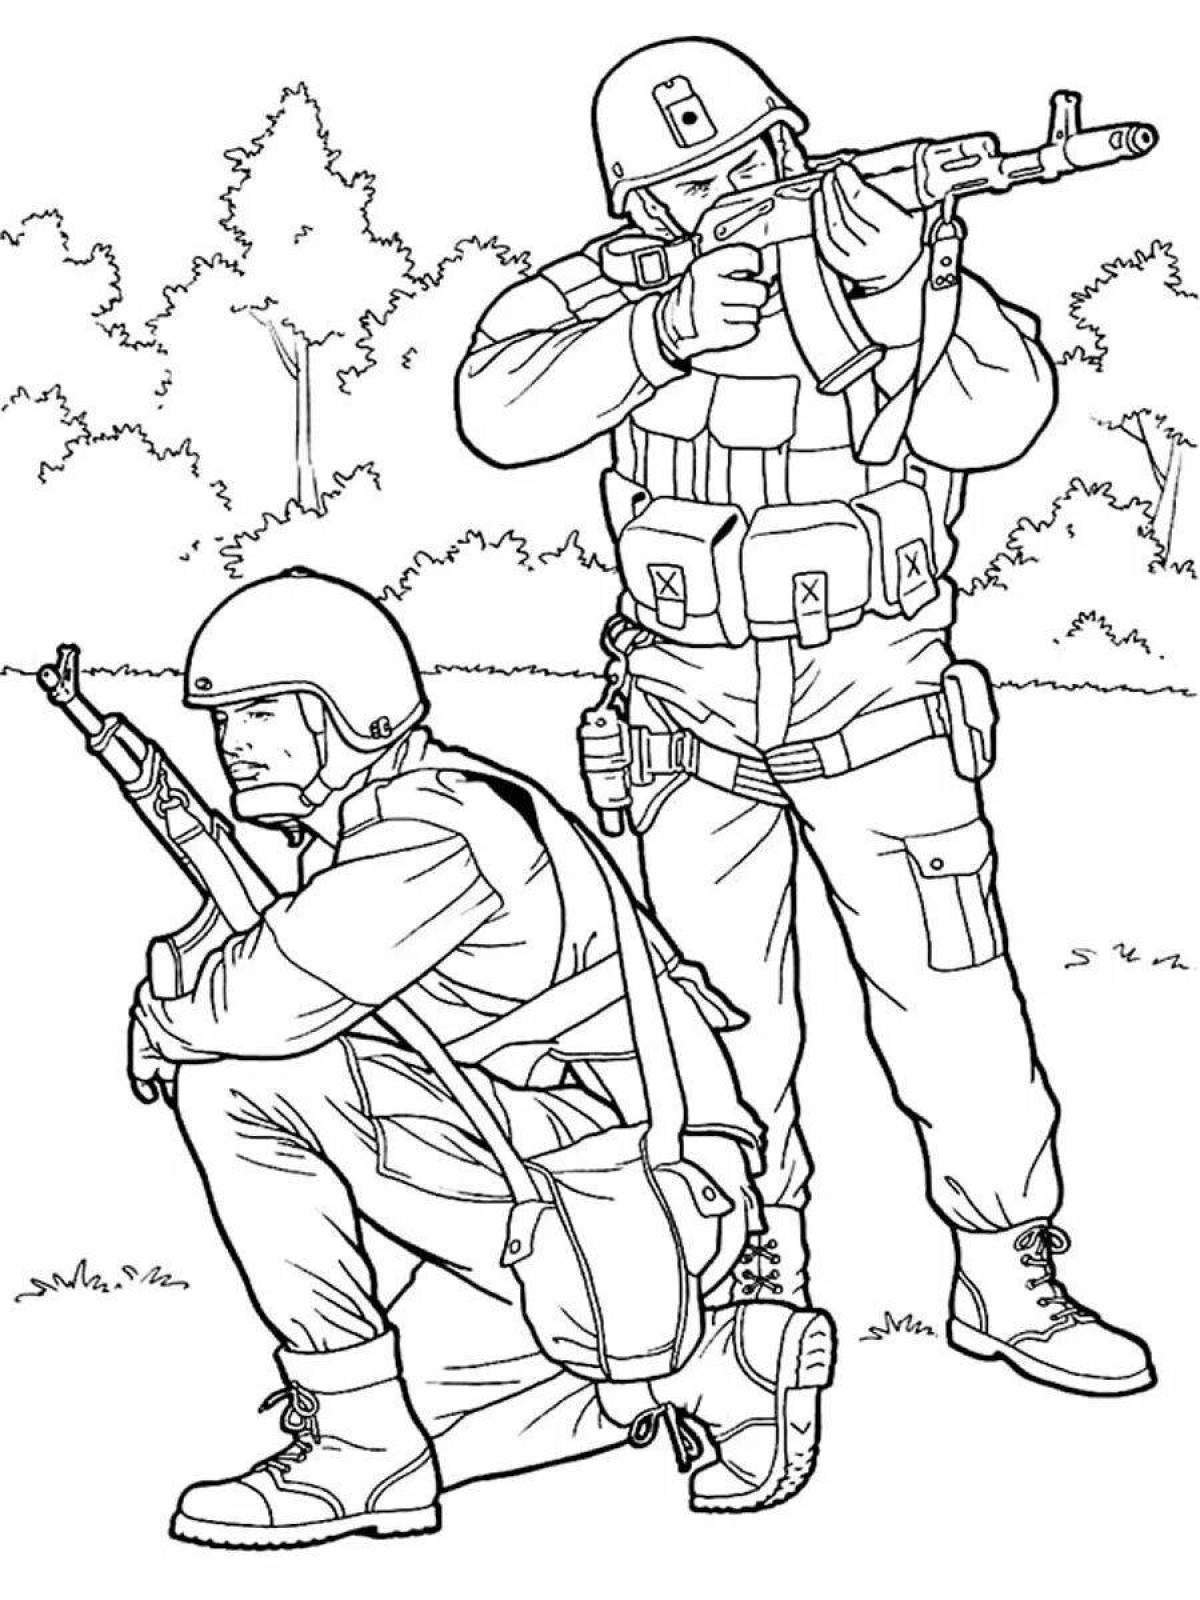 Powerful military soldiers coloring pages for kids